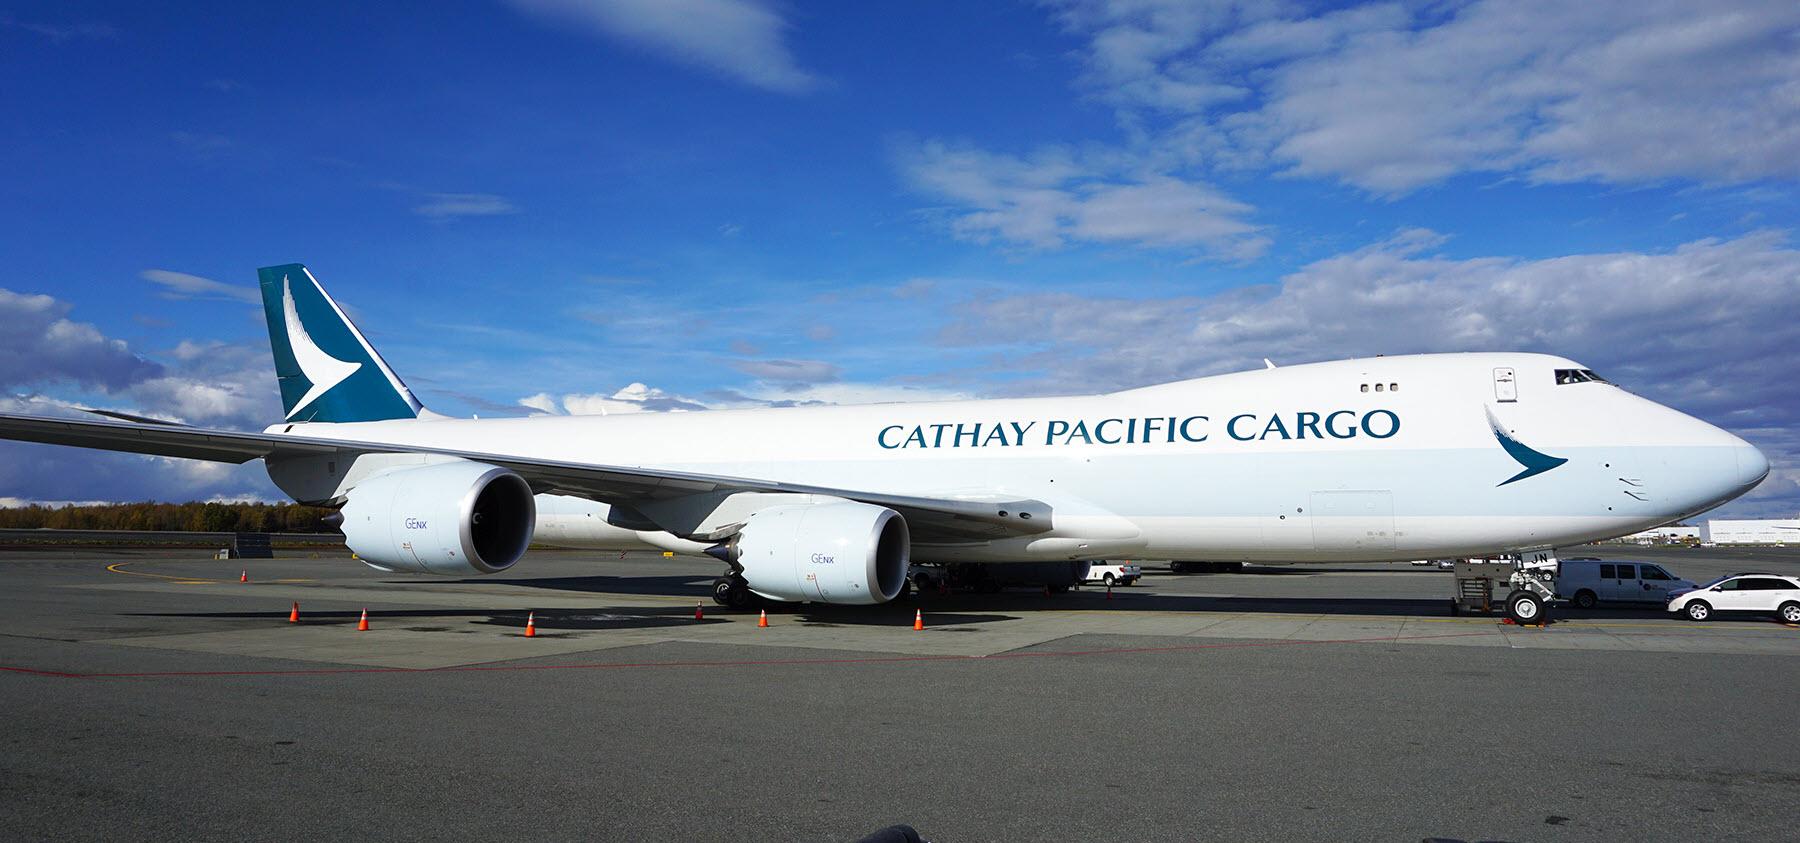 Cathay Pacific Cargo plane.